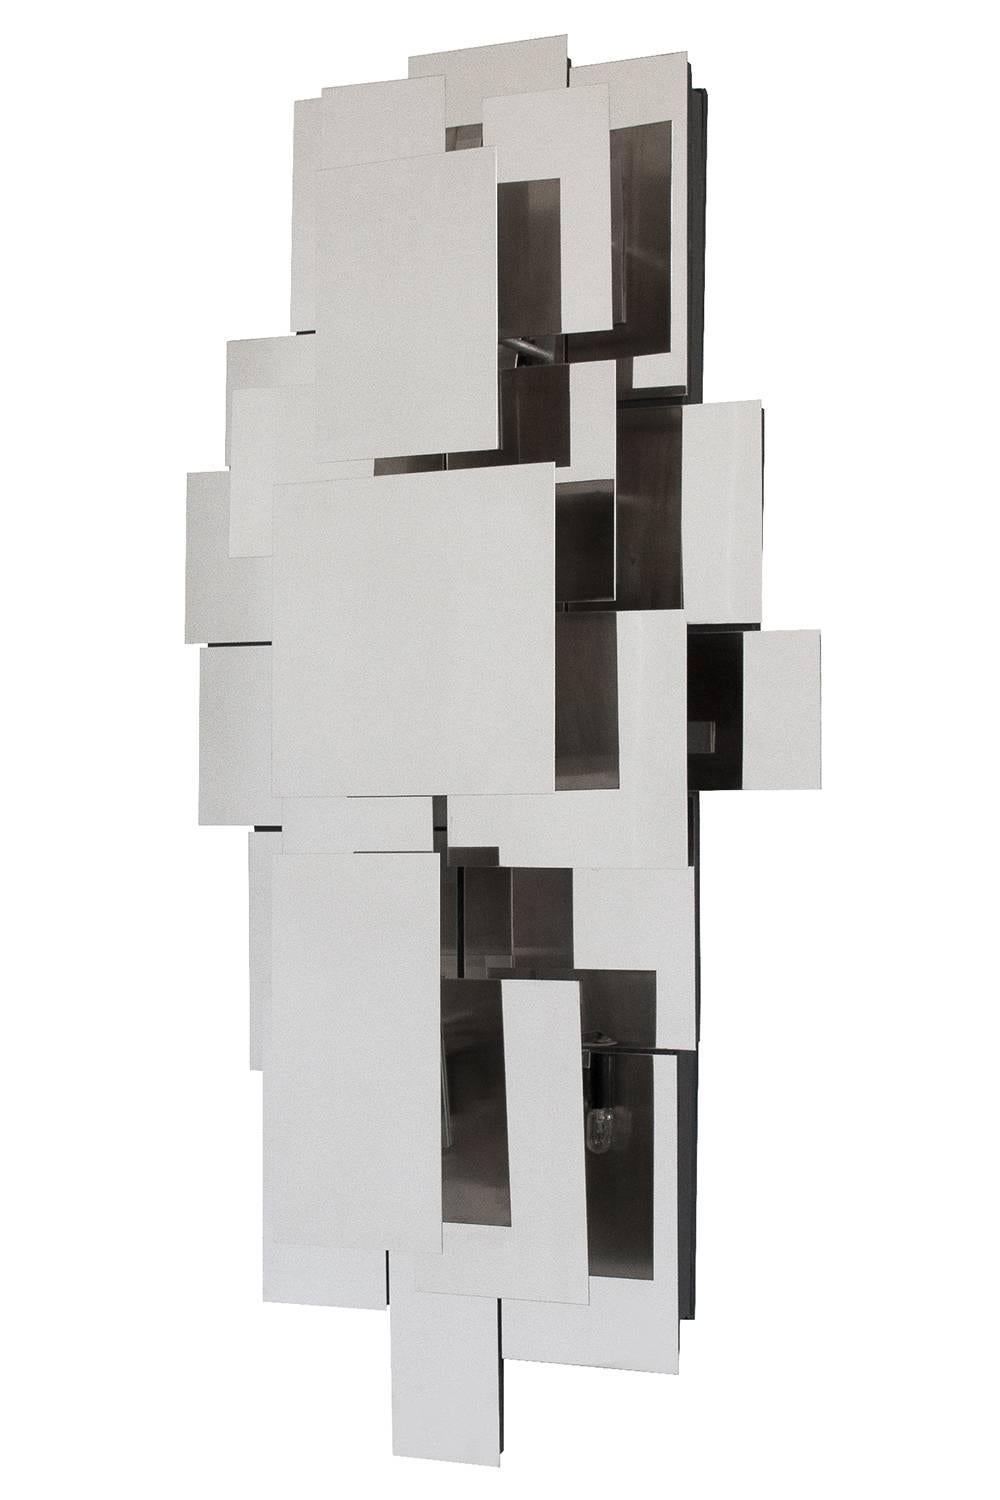 Unique Reggiani style polished steel wall light sculpture or sconce. Layered asymmetrical mirror polished steel rectangular forms conceal five candelabra base light bulbs. The light sculpture operates by touch. Touch any metal part to engage the